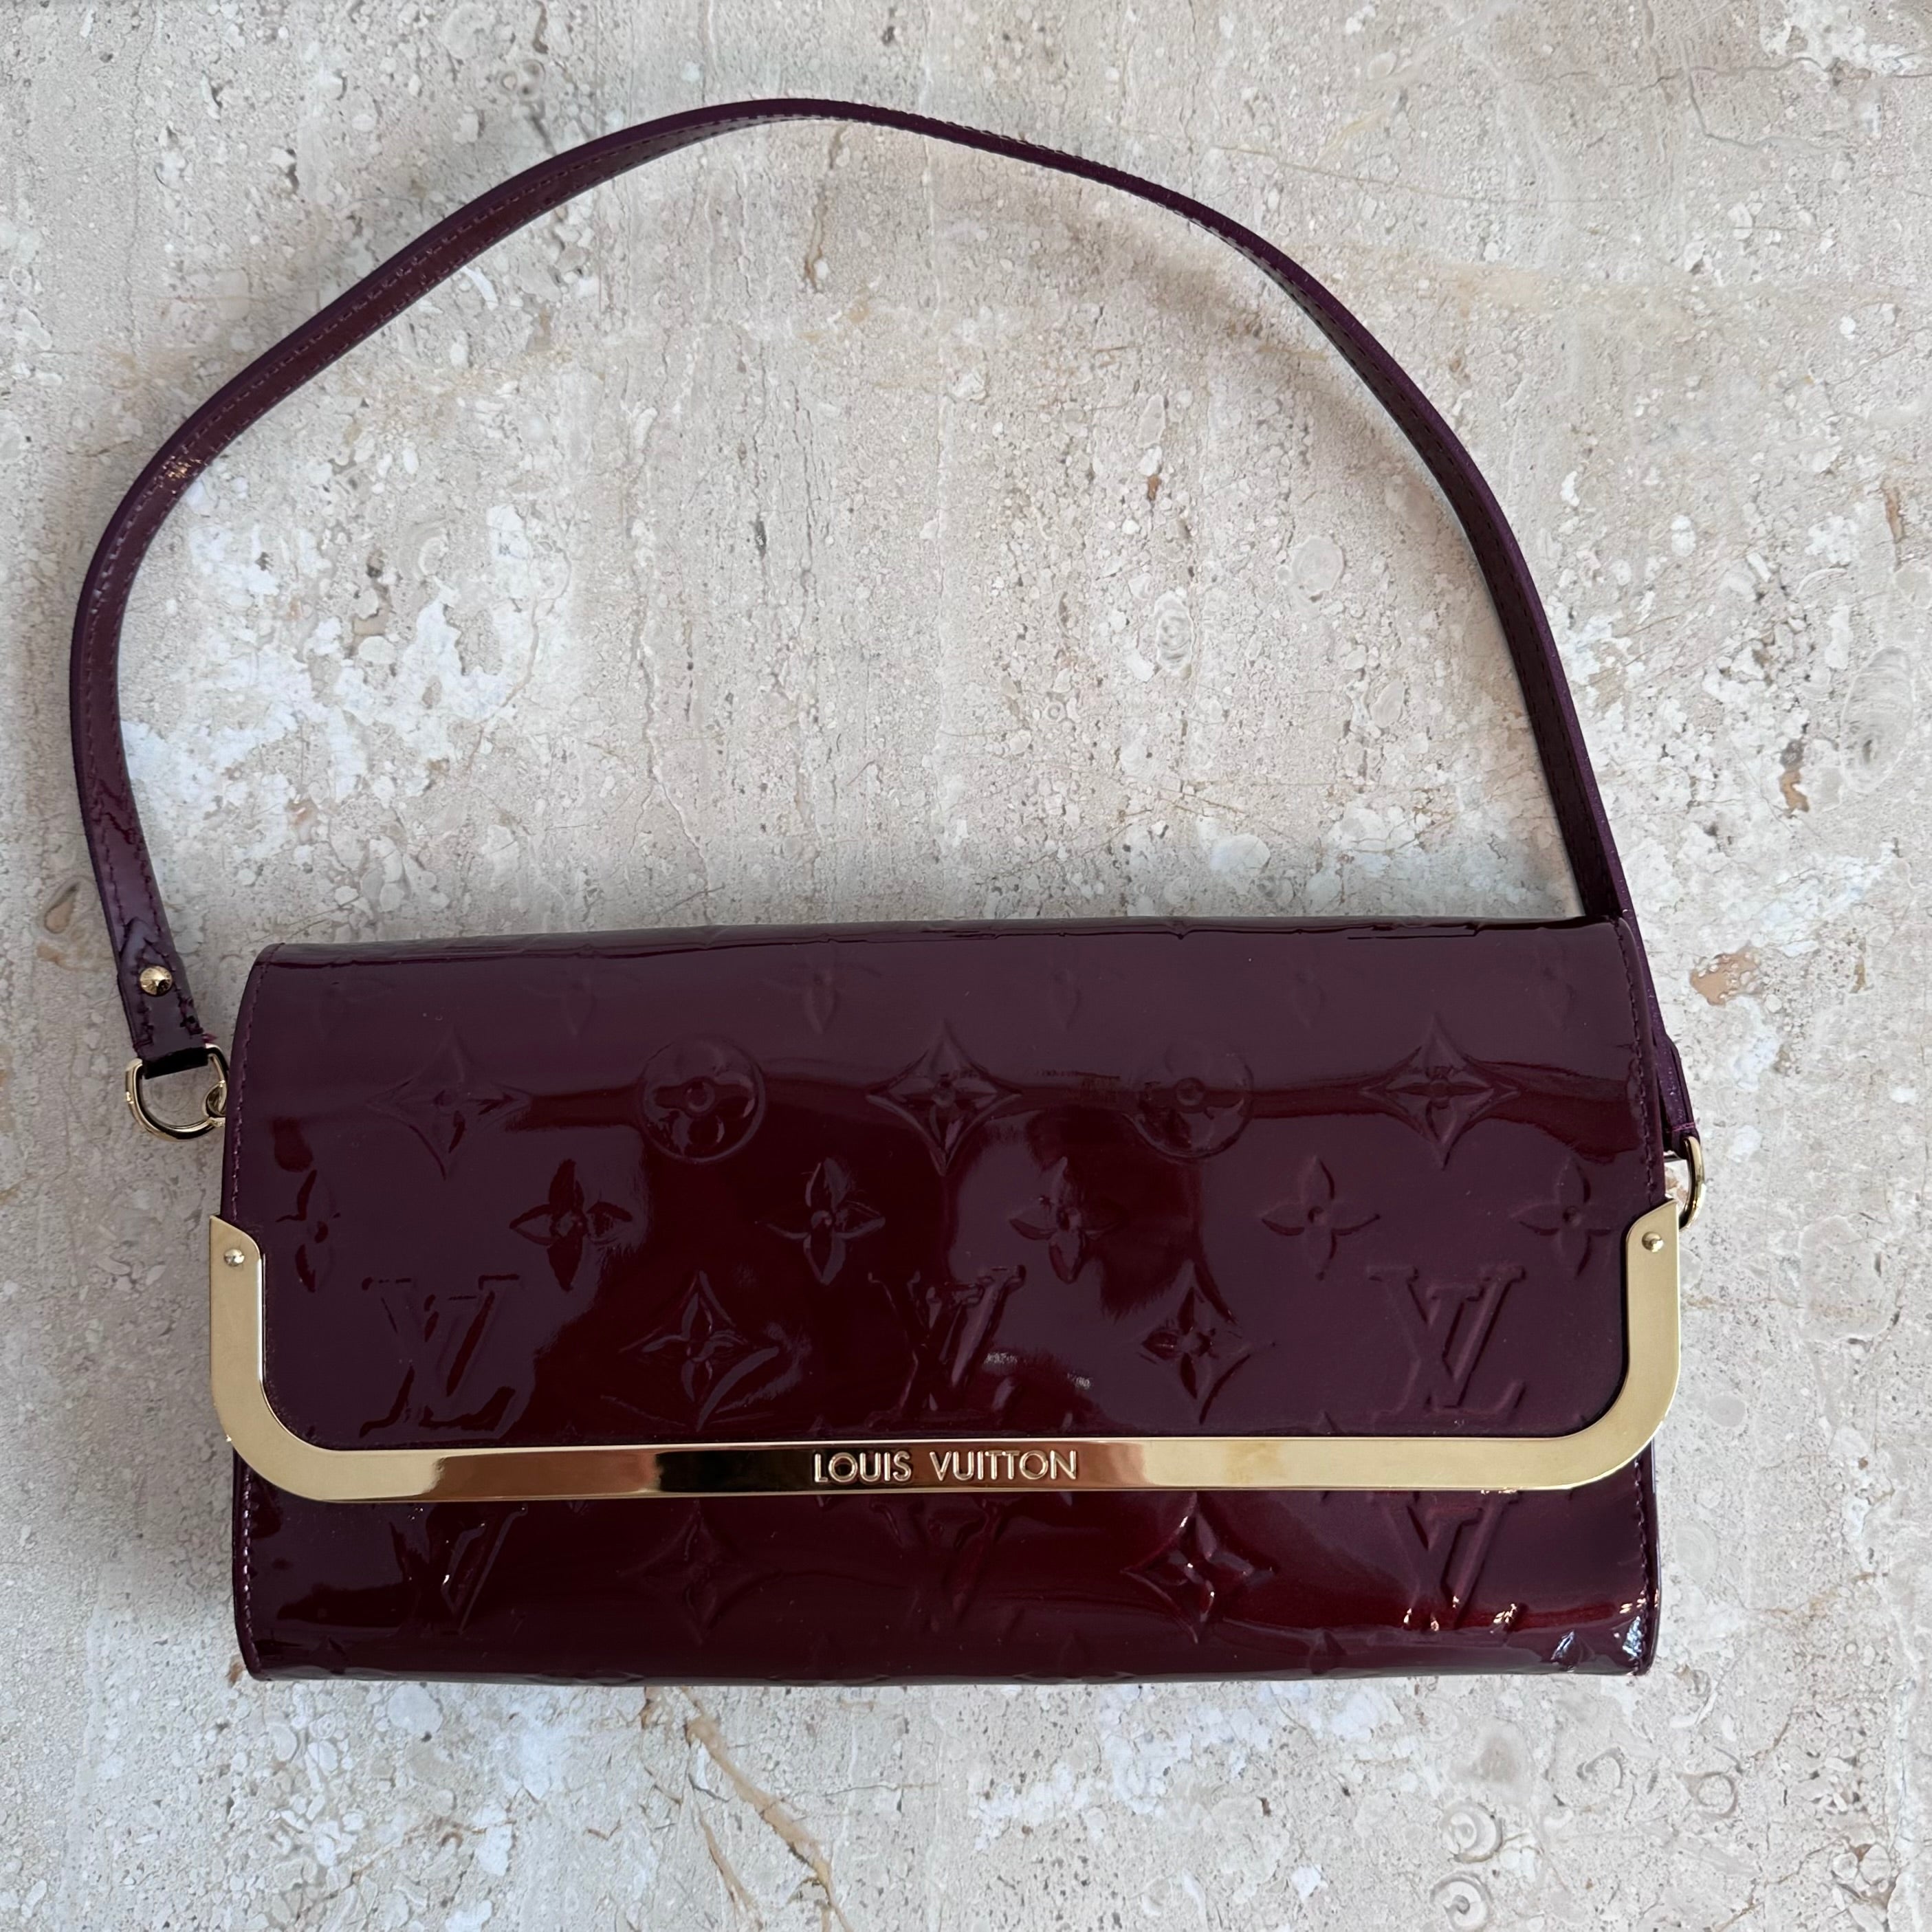 Pre-owned Louis Quatorze Leather Small Bag In Burgundy